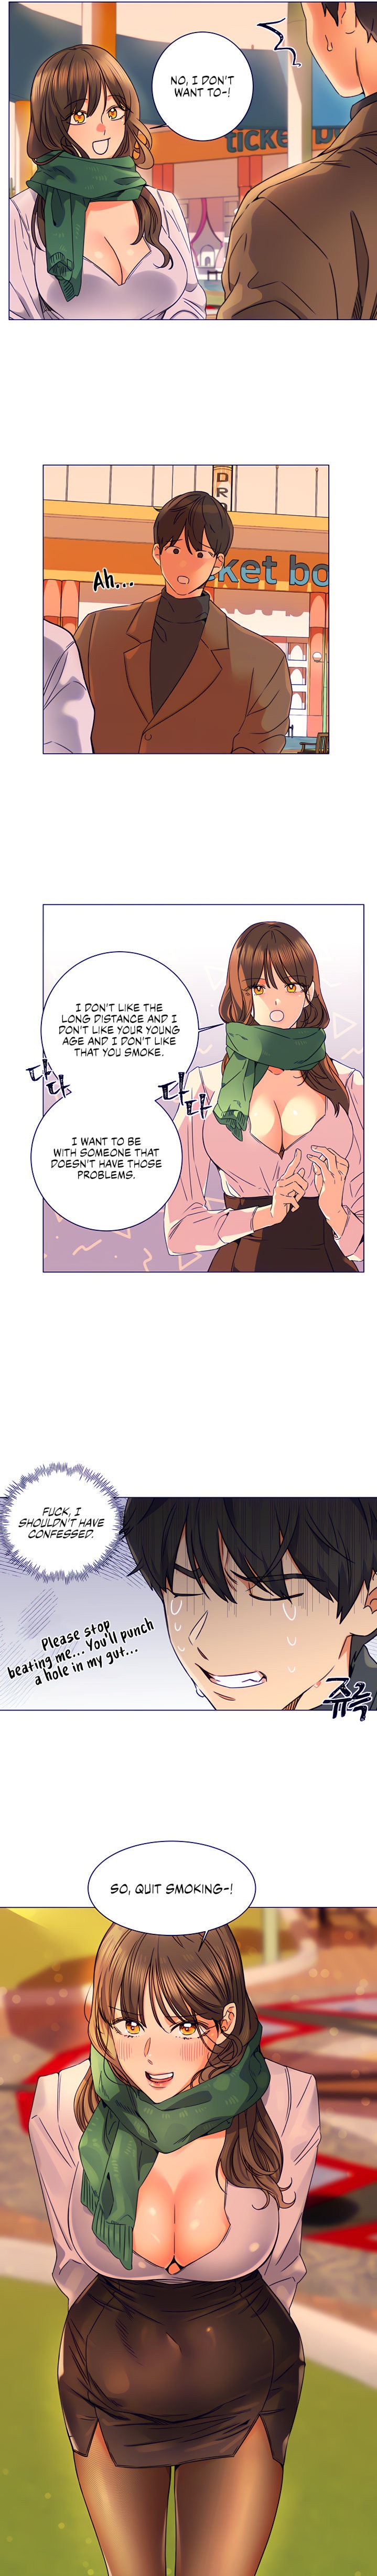 My girlfriend is so naughty - Chapter 1 Page 6